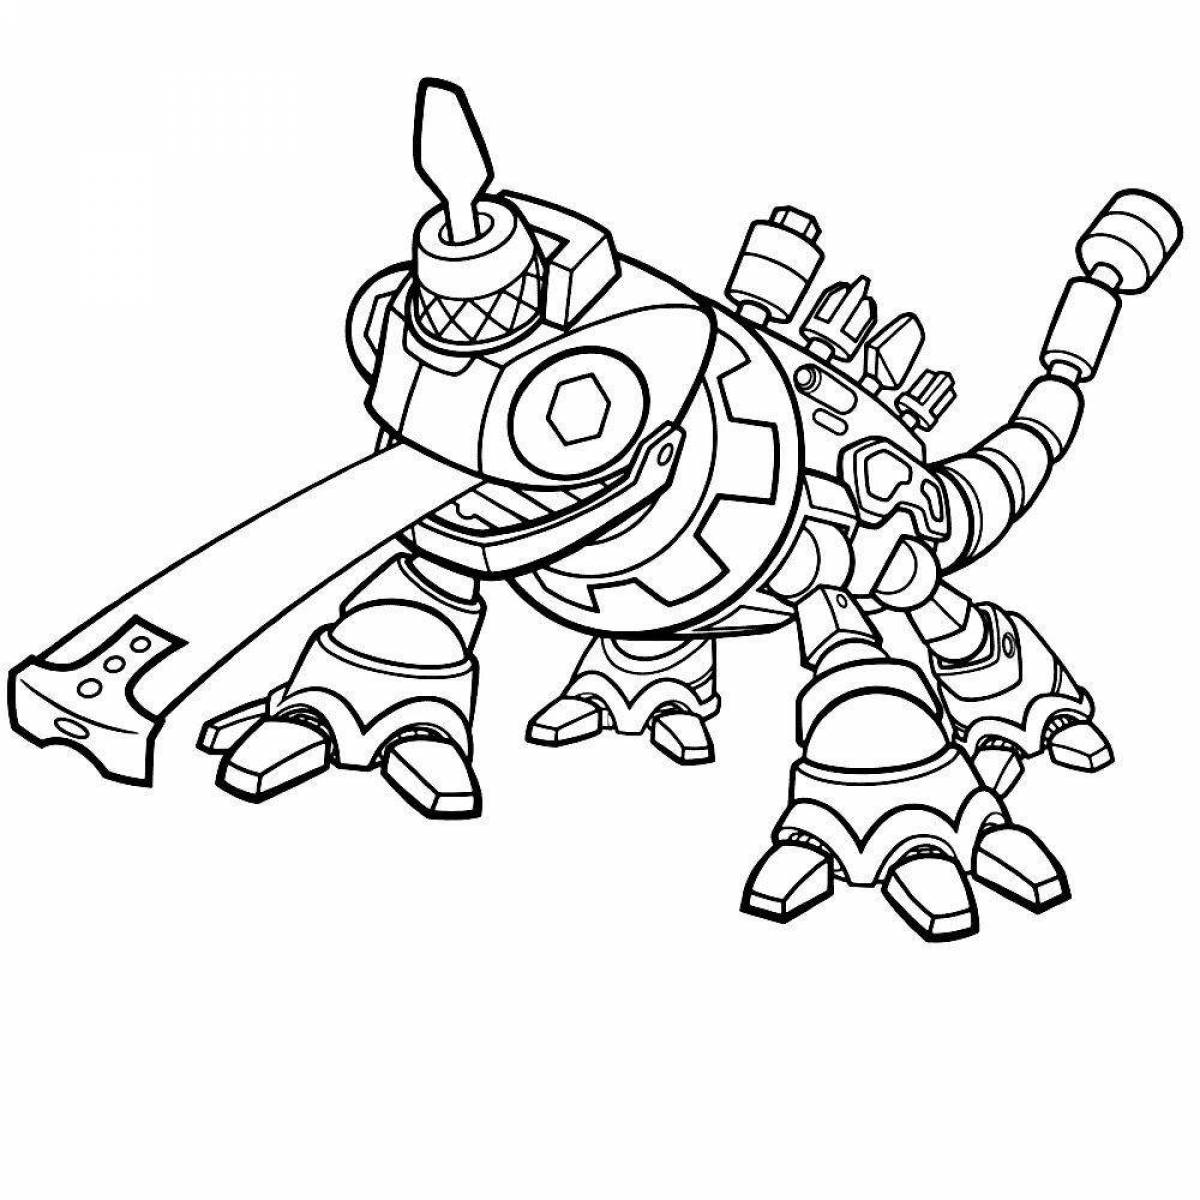 Breathtaking screamers coloring pages for boys